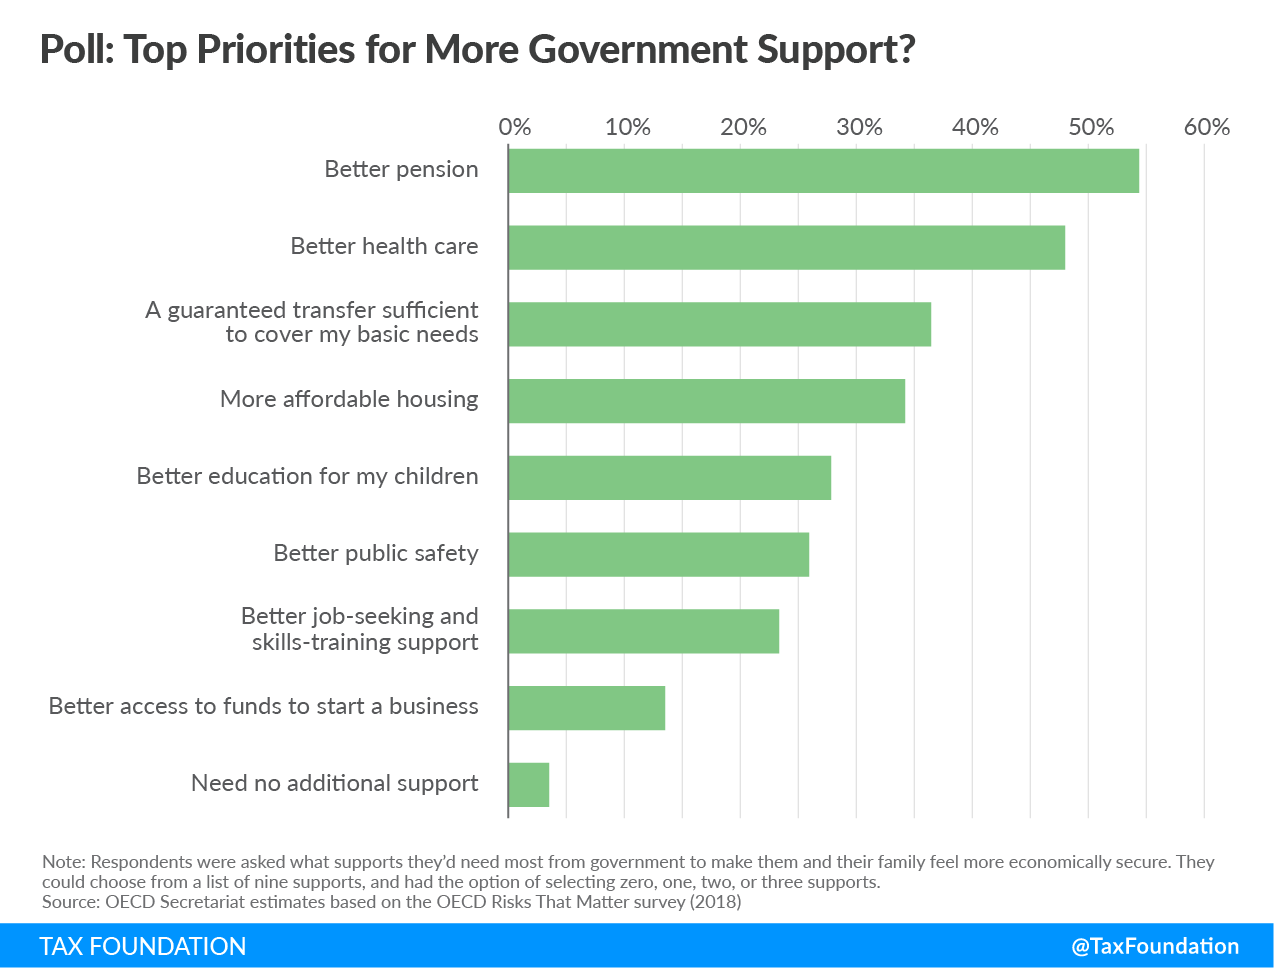 Top priorities for more government support are better pensions and healthcare